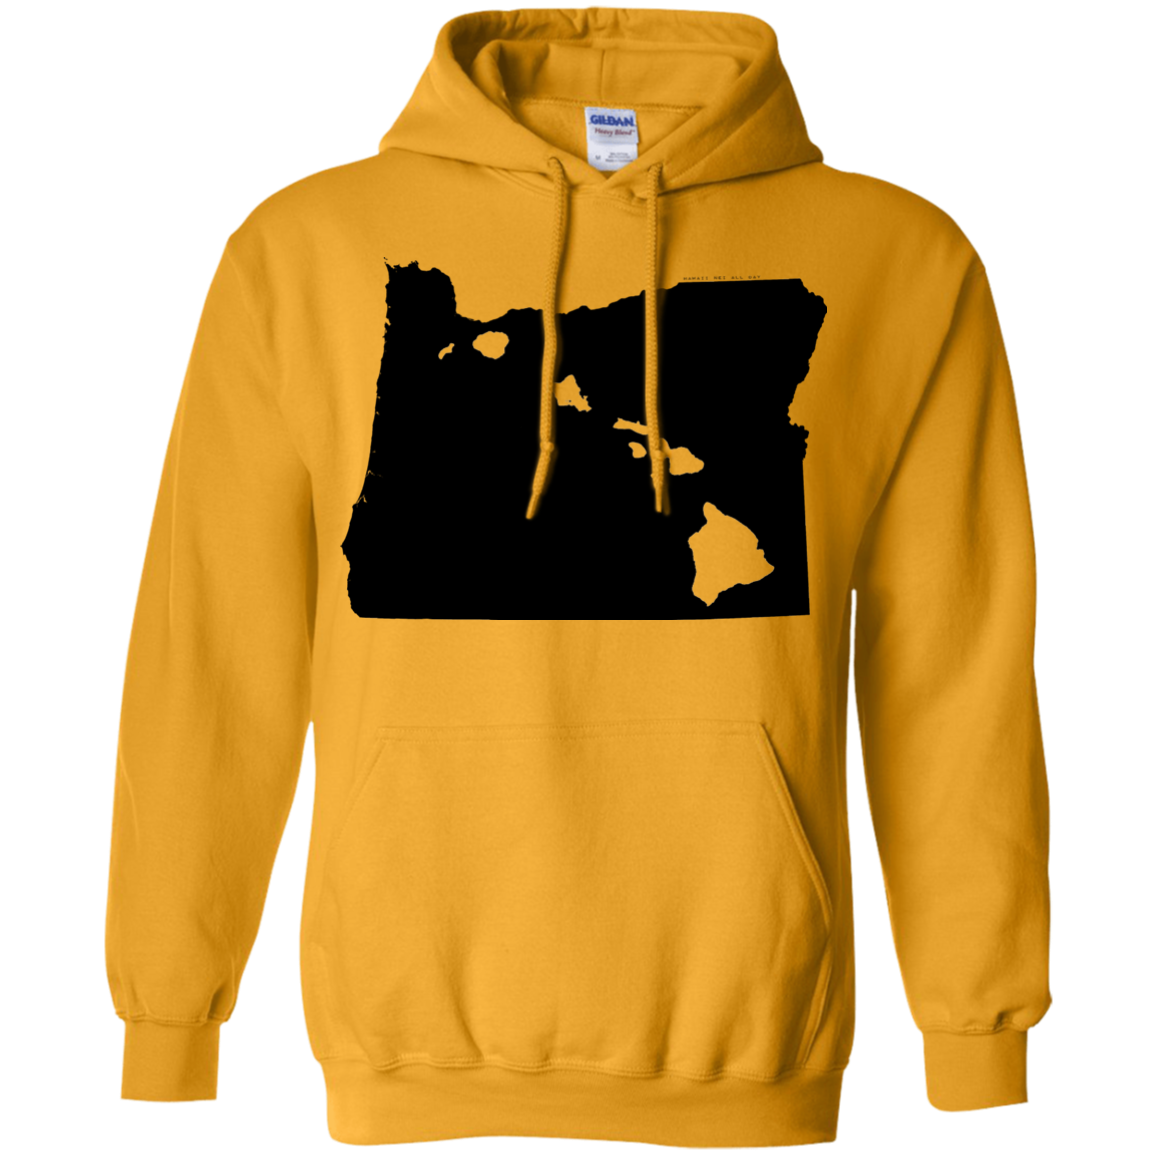 Living in Oregon with Hawaii Roots Pullover Hoodie 8 oz., Sweatshirts, Hawaii Nei All Day